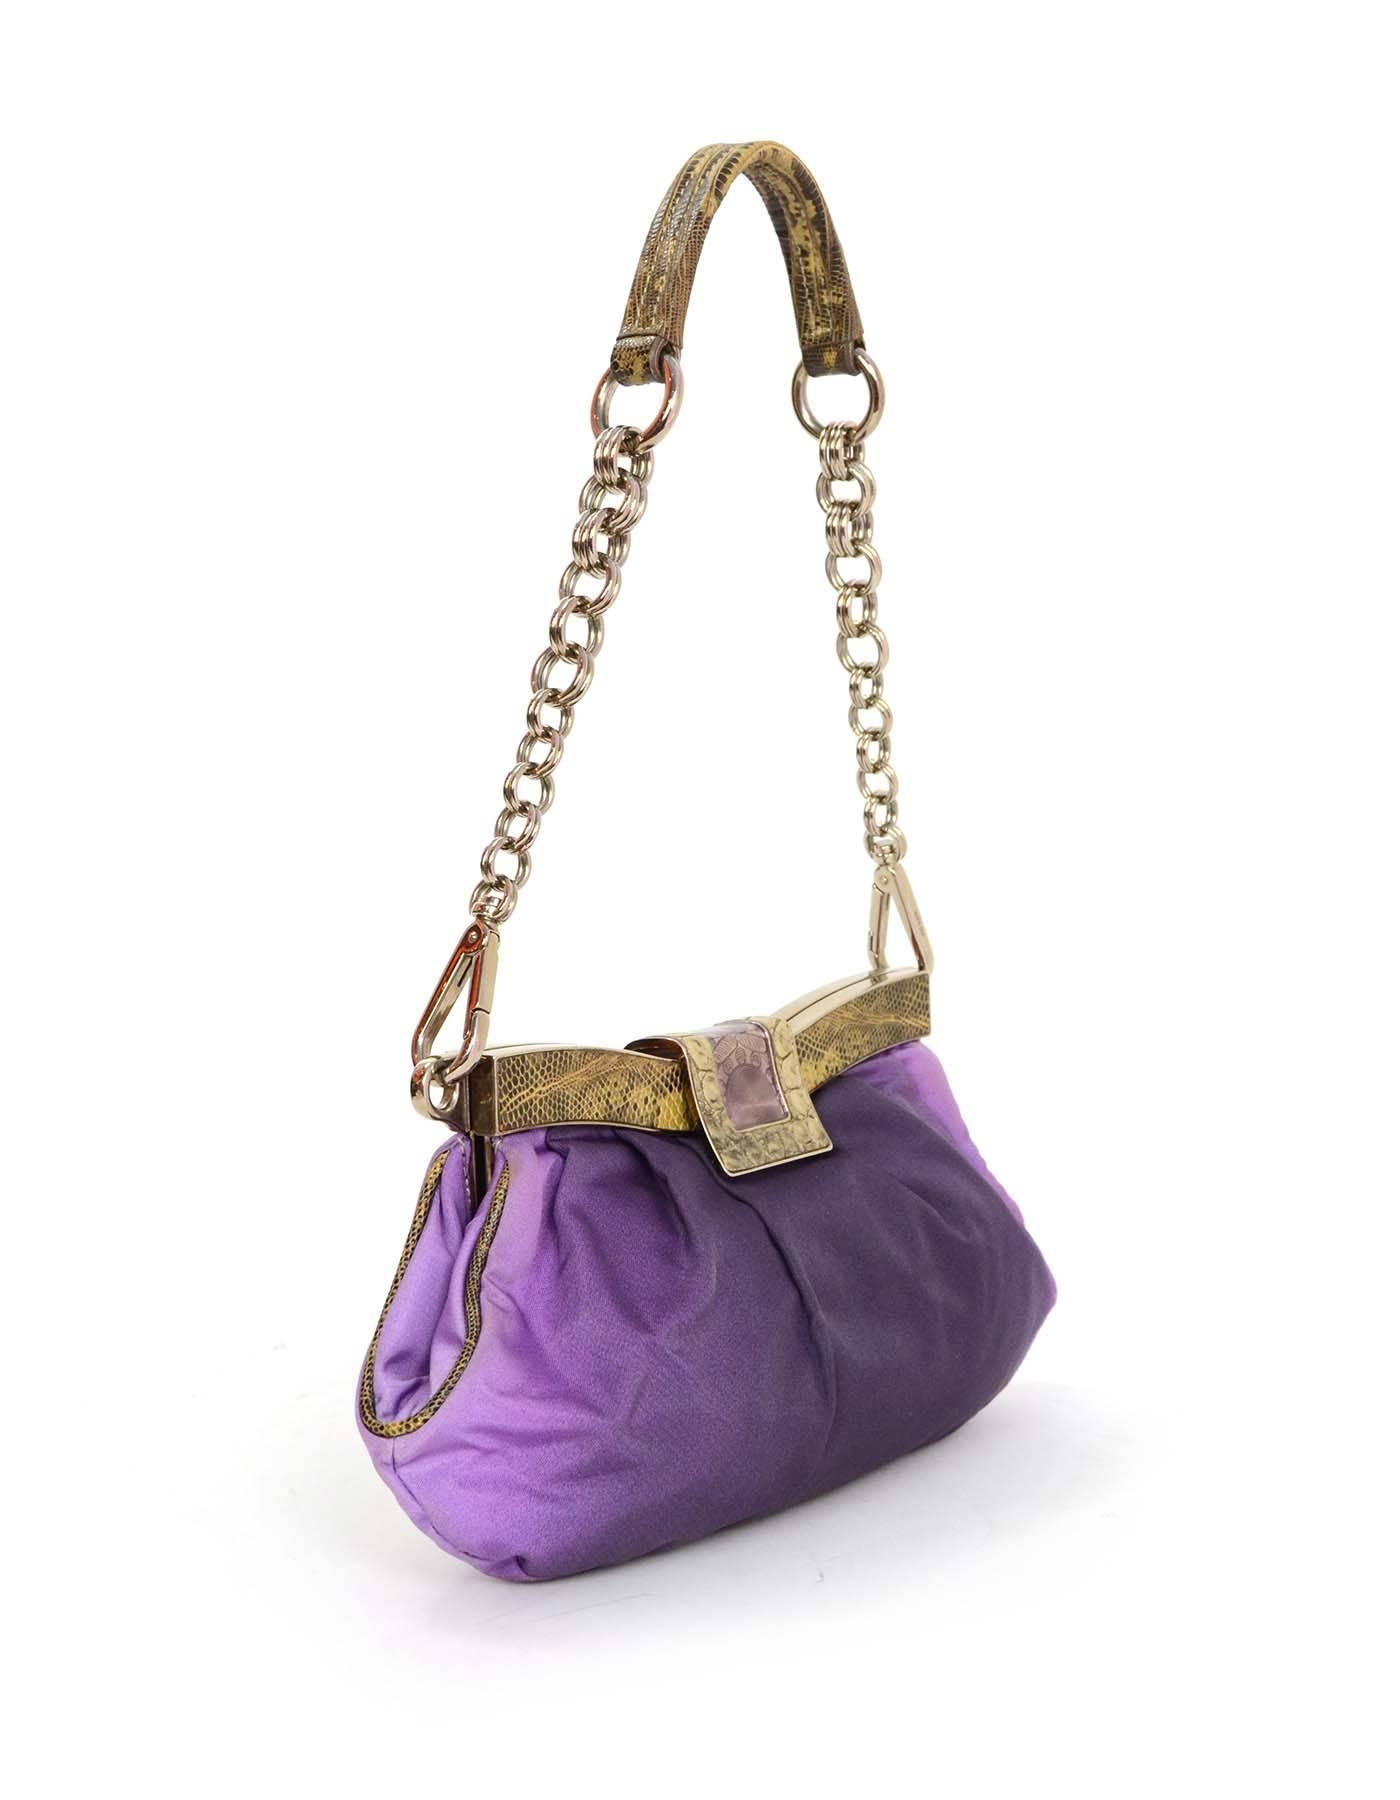 Prada Purple Ombre Satin Evening Bag 
Features optional chain link strap and lizard skin trim
Made In: Italy
Color: Purple beige and black
Hardware: Silvertone
Materials: Satin and lizard skin
Lining: Purple leather
Closure/Opening: